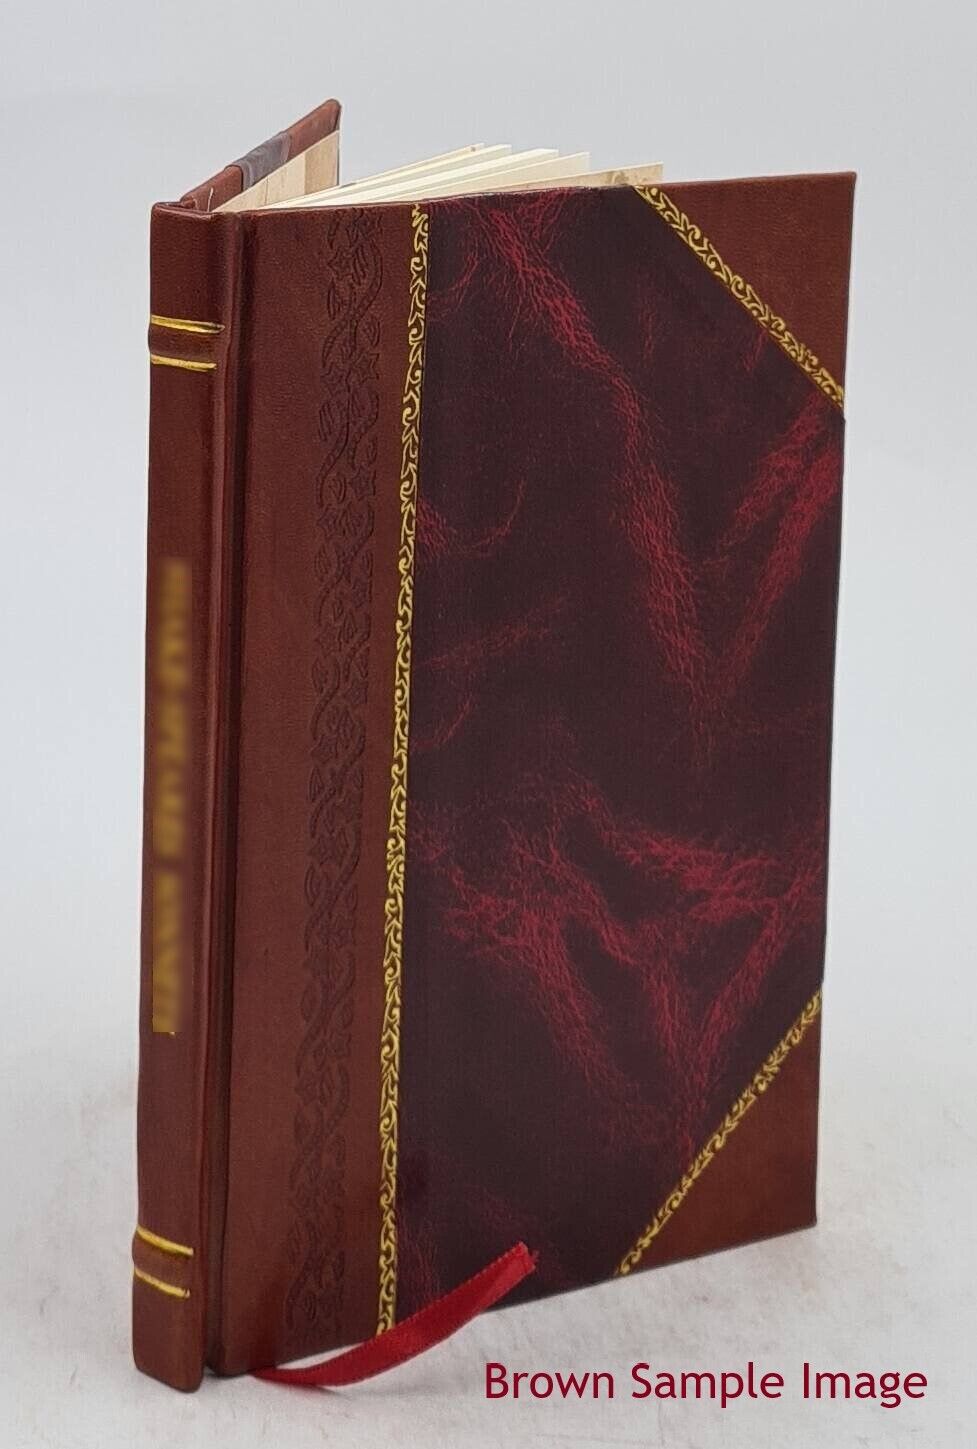 Church life among the Baptists 1883 [Leather Bound] by George Duncan